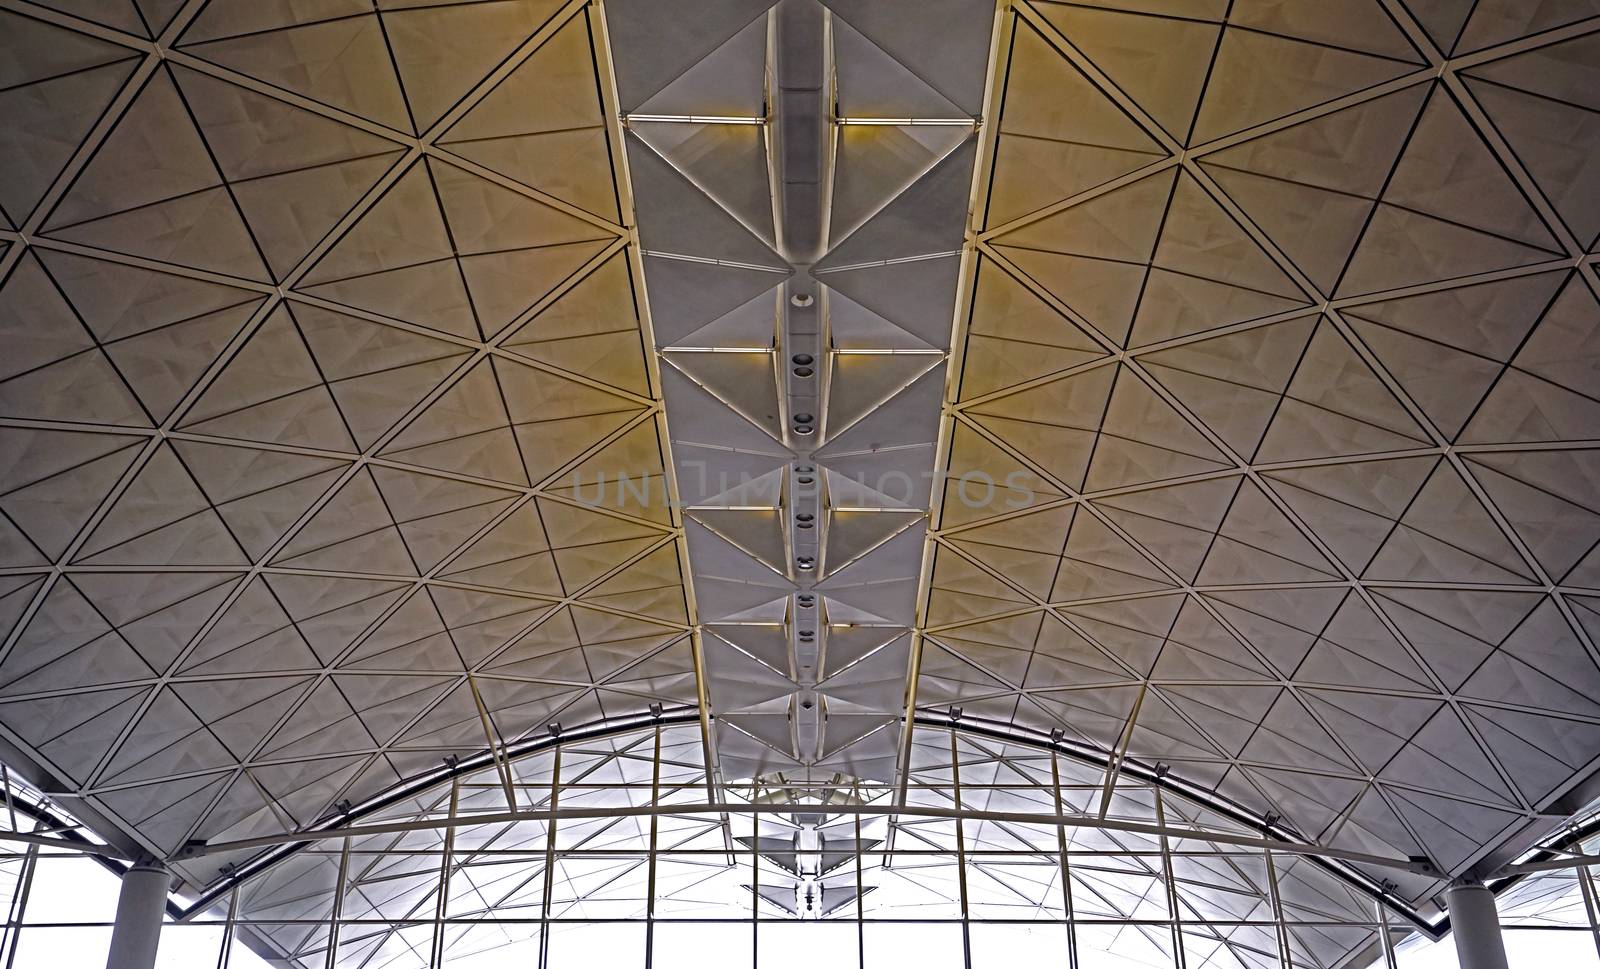 Interior and ceiling of airport archtecture terminal building by cougarsan